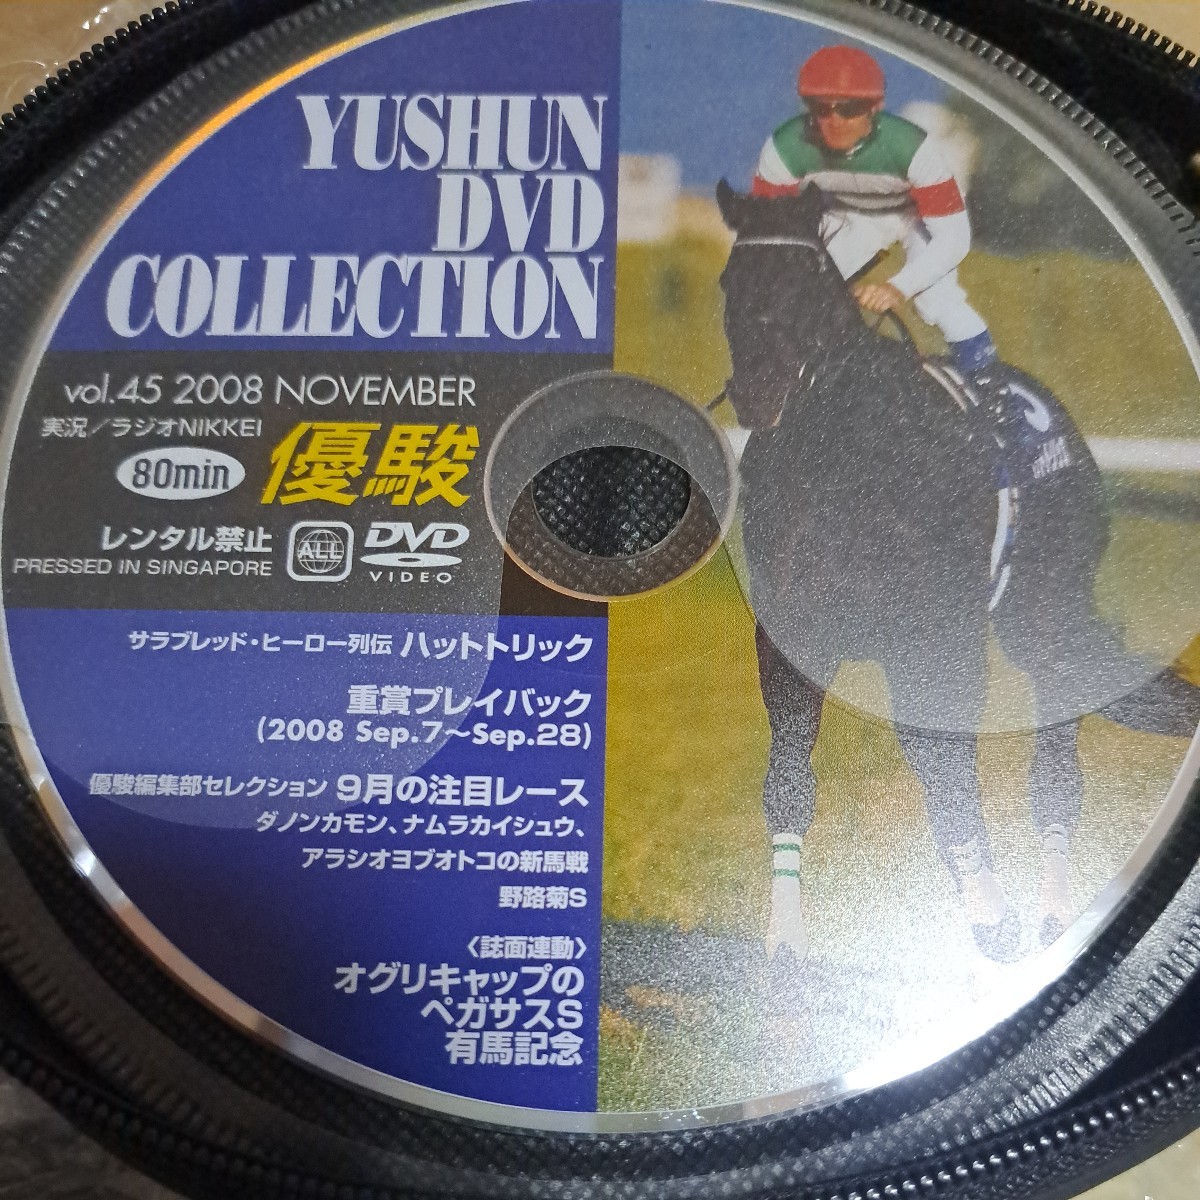  horse racing super .DVD collection Vol.45 2008 NOVEMBER DVD disk only hat-trick o Gris cap 